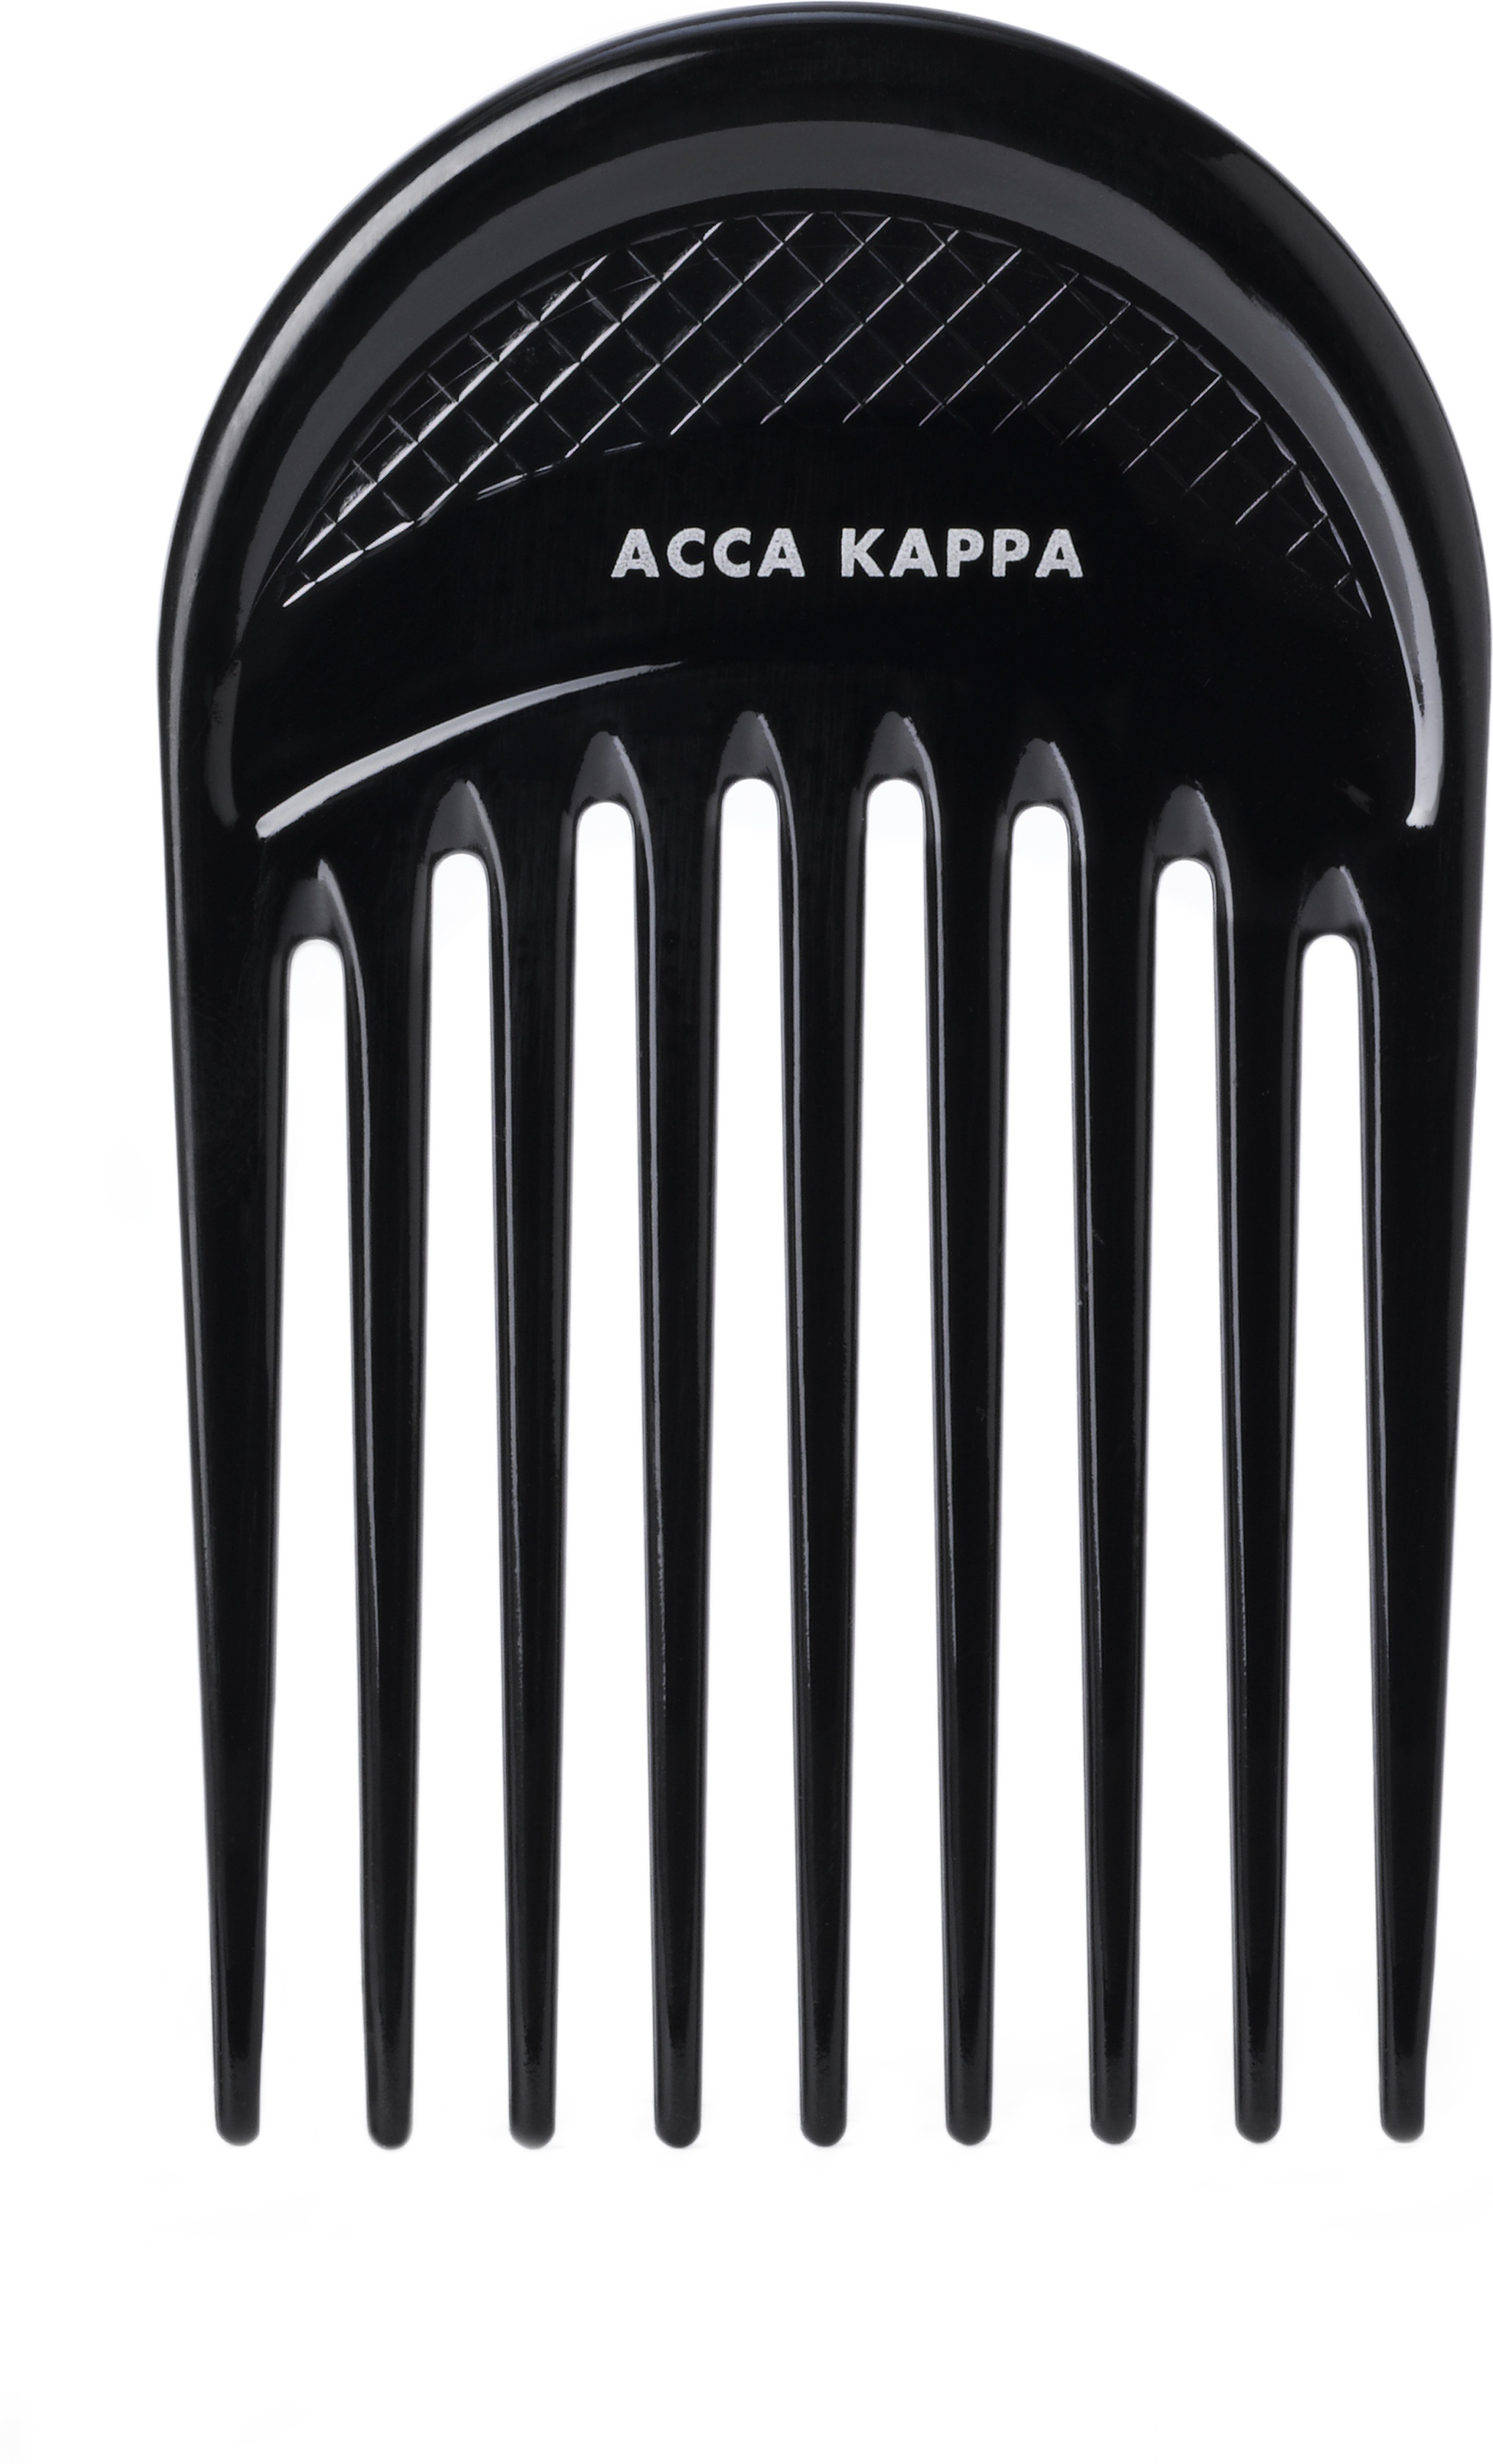 Acca Kappa Professional Round Afro Comb Styler – 7626 Black